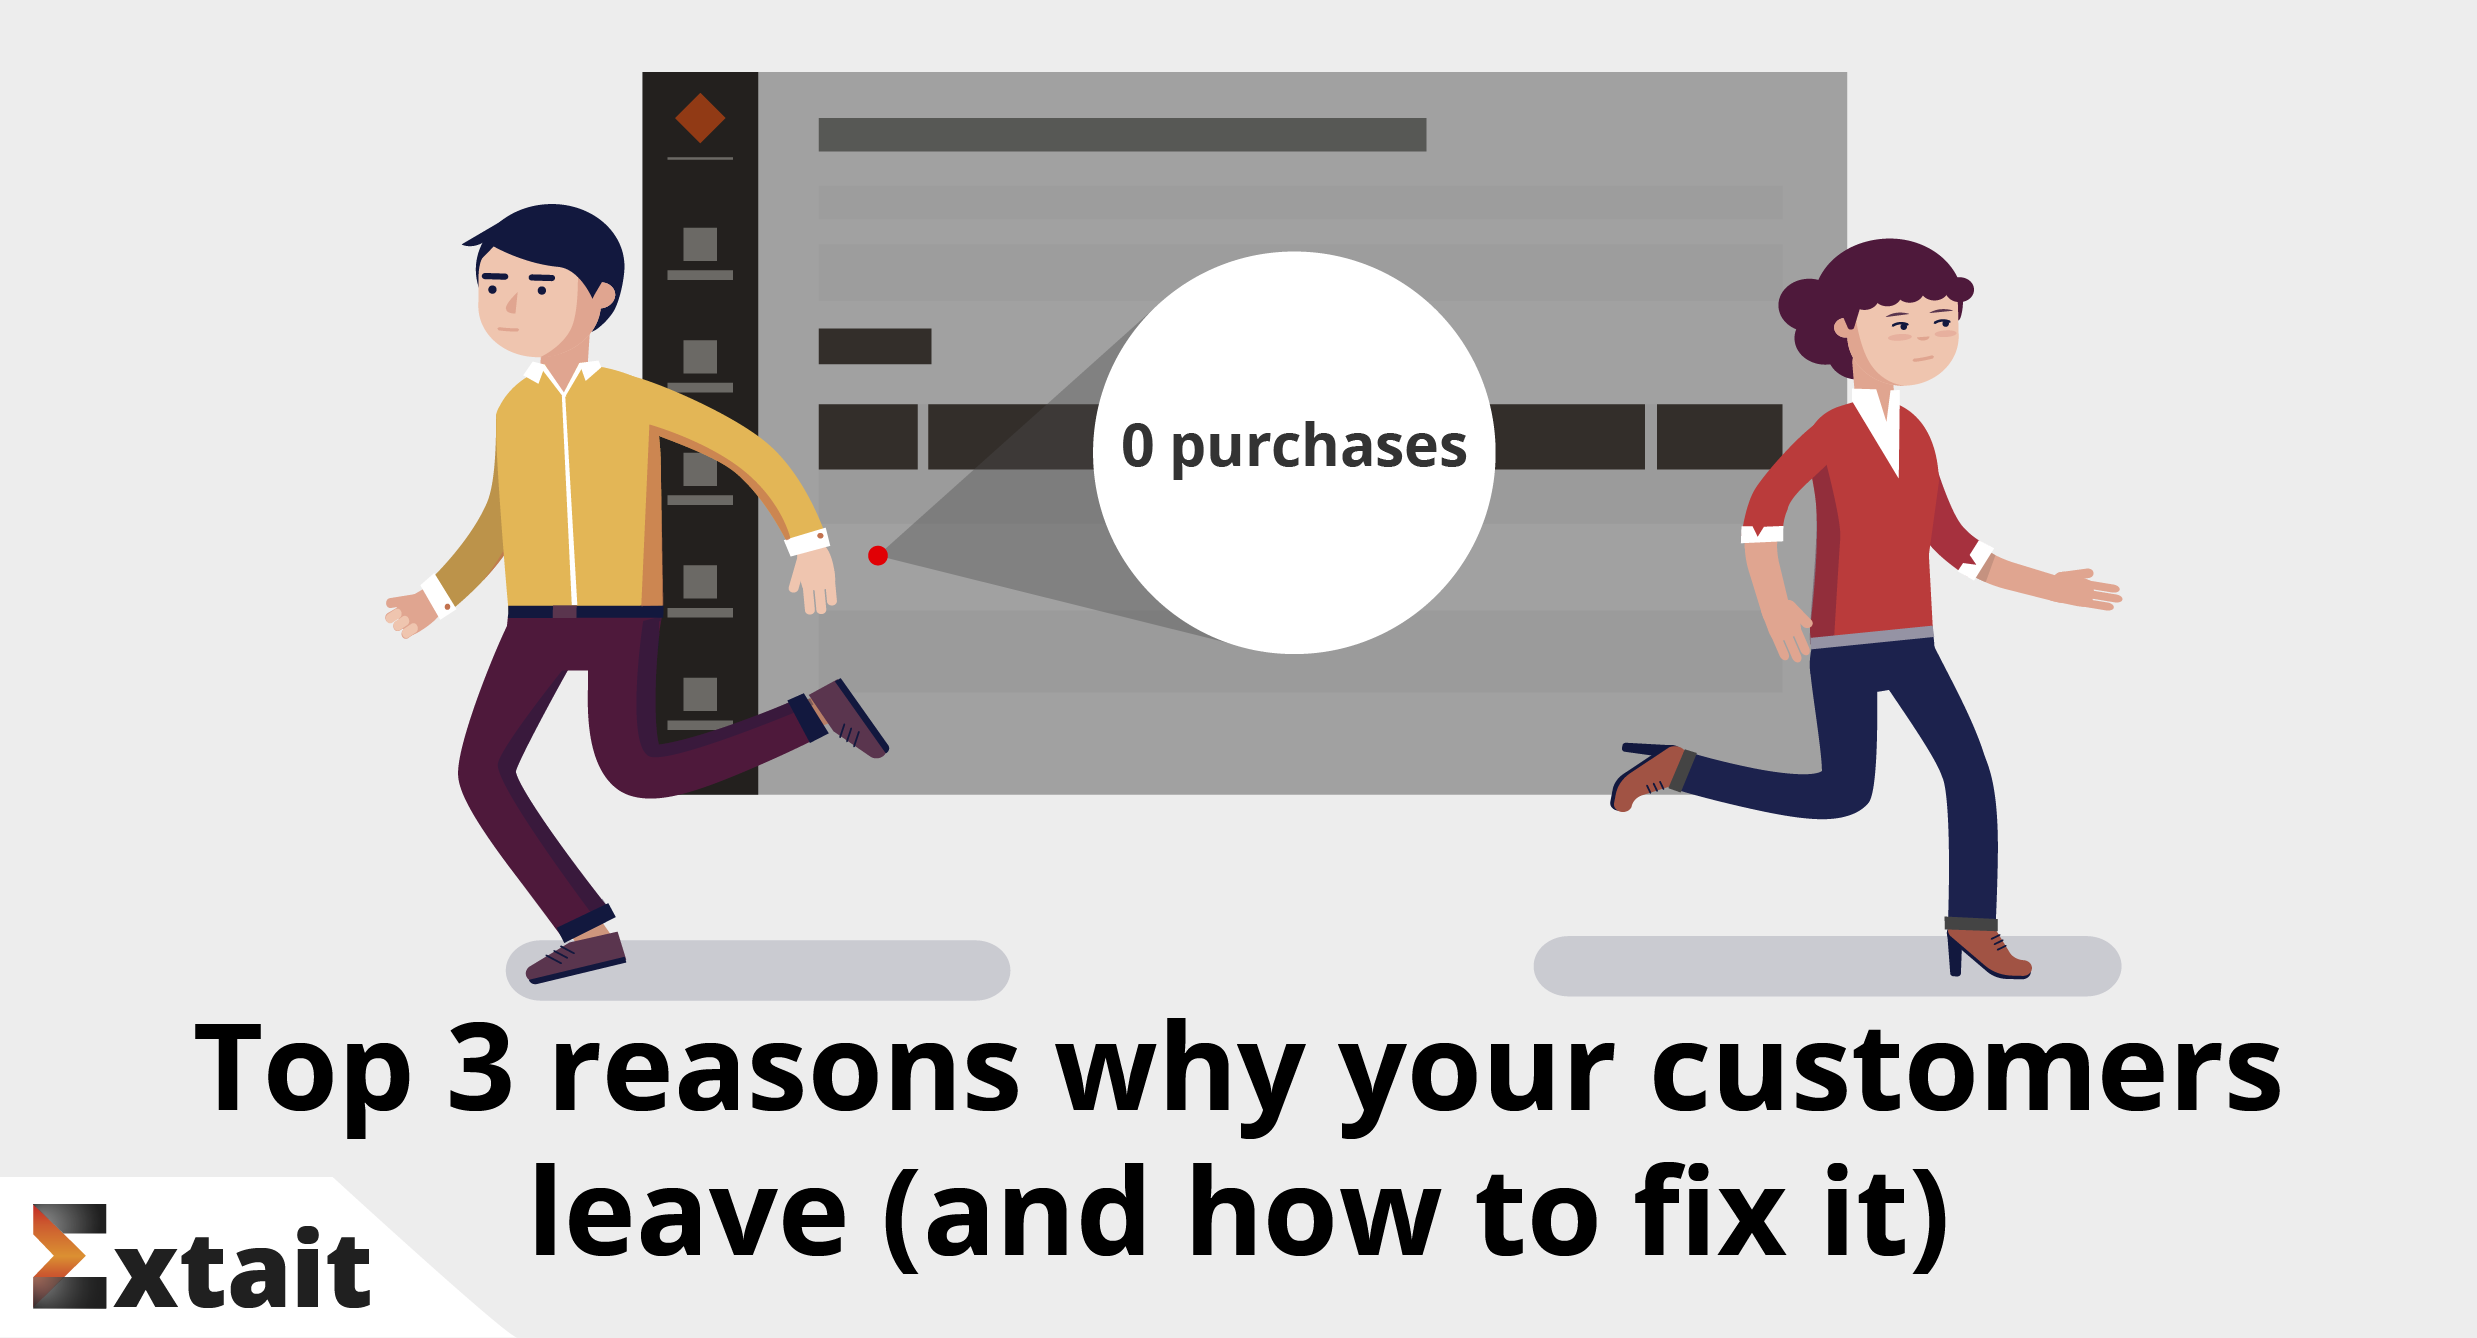 Top 3 reasons why customers leave (and how to fix it)